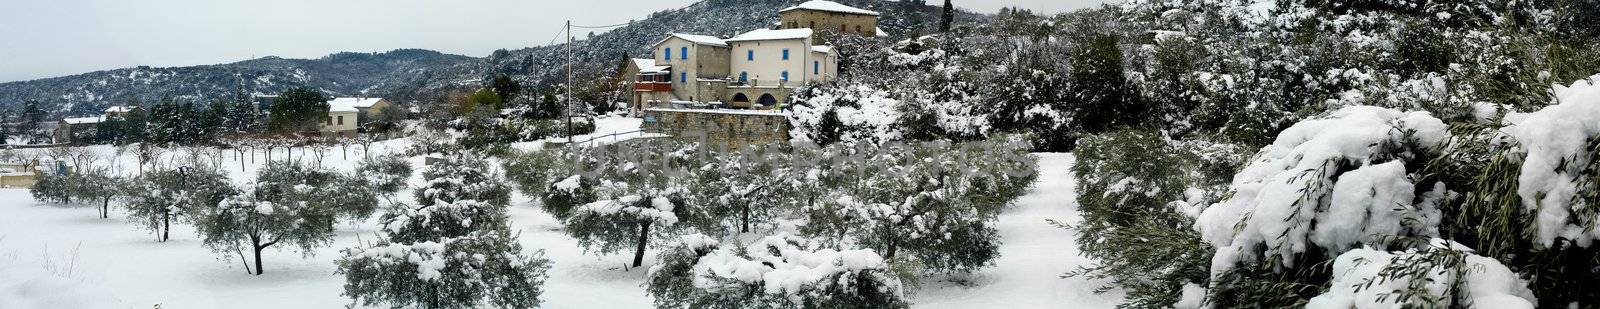 Landscape of Gard under snow. Gard is a department of the South-east of France located in the Cevennes.